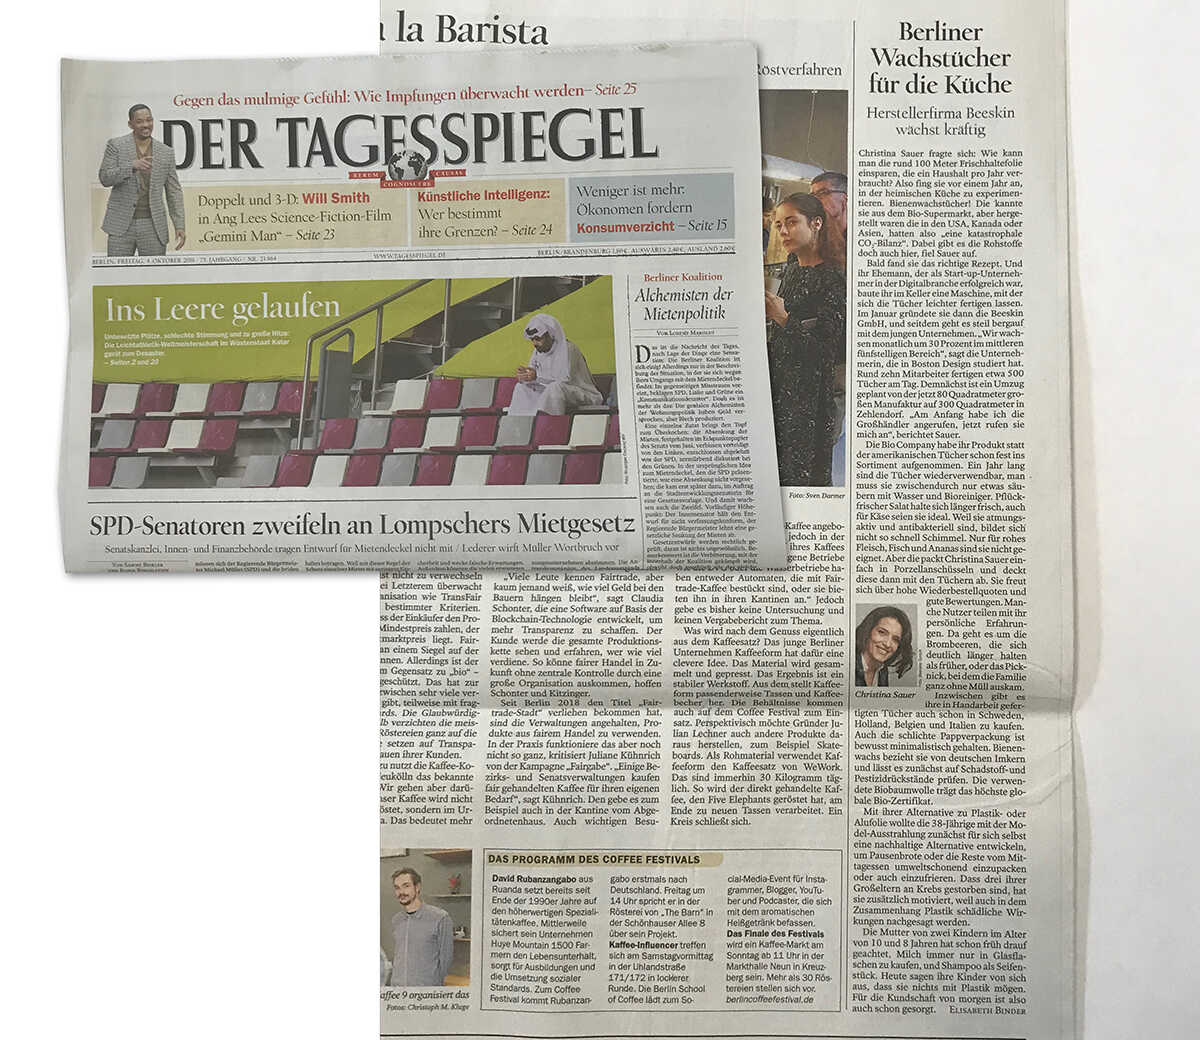 Tagesspiegel Berlin beeswax wraps from Berlin, picture showing Christina Sauer, CEO